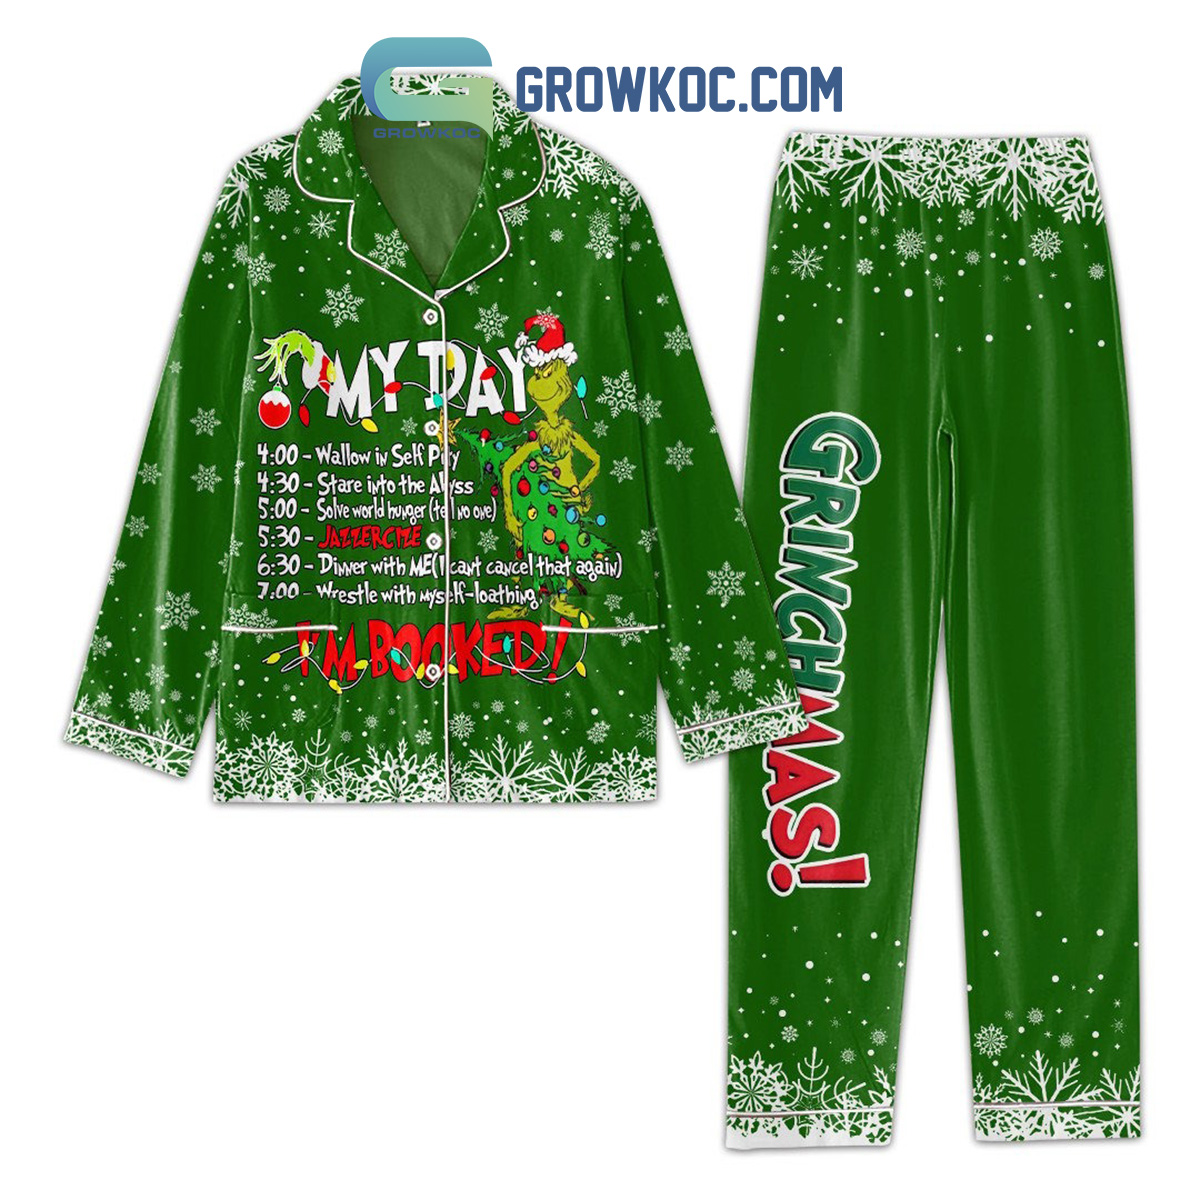 Grinch My Day Jazzercize Is'm Booked Grinchmas How The Grinch Stole Christmas Polyester Pajama Setss